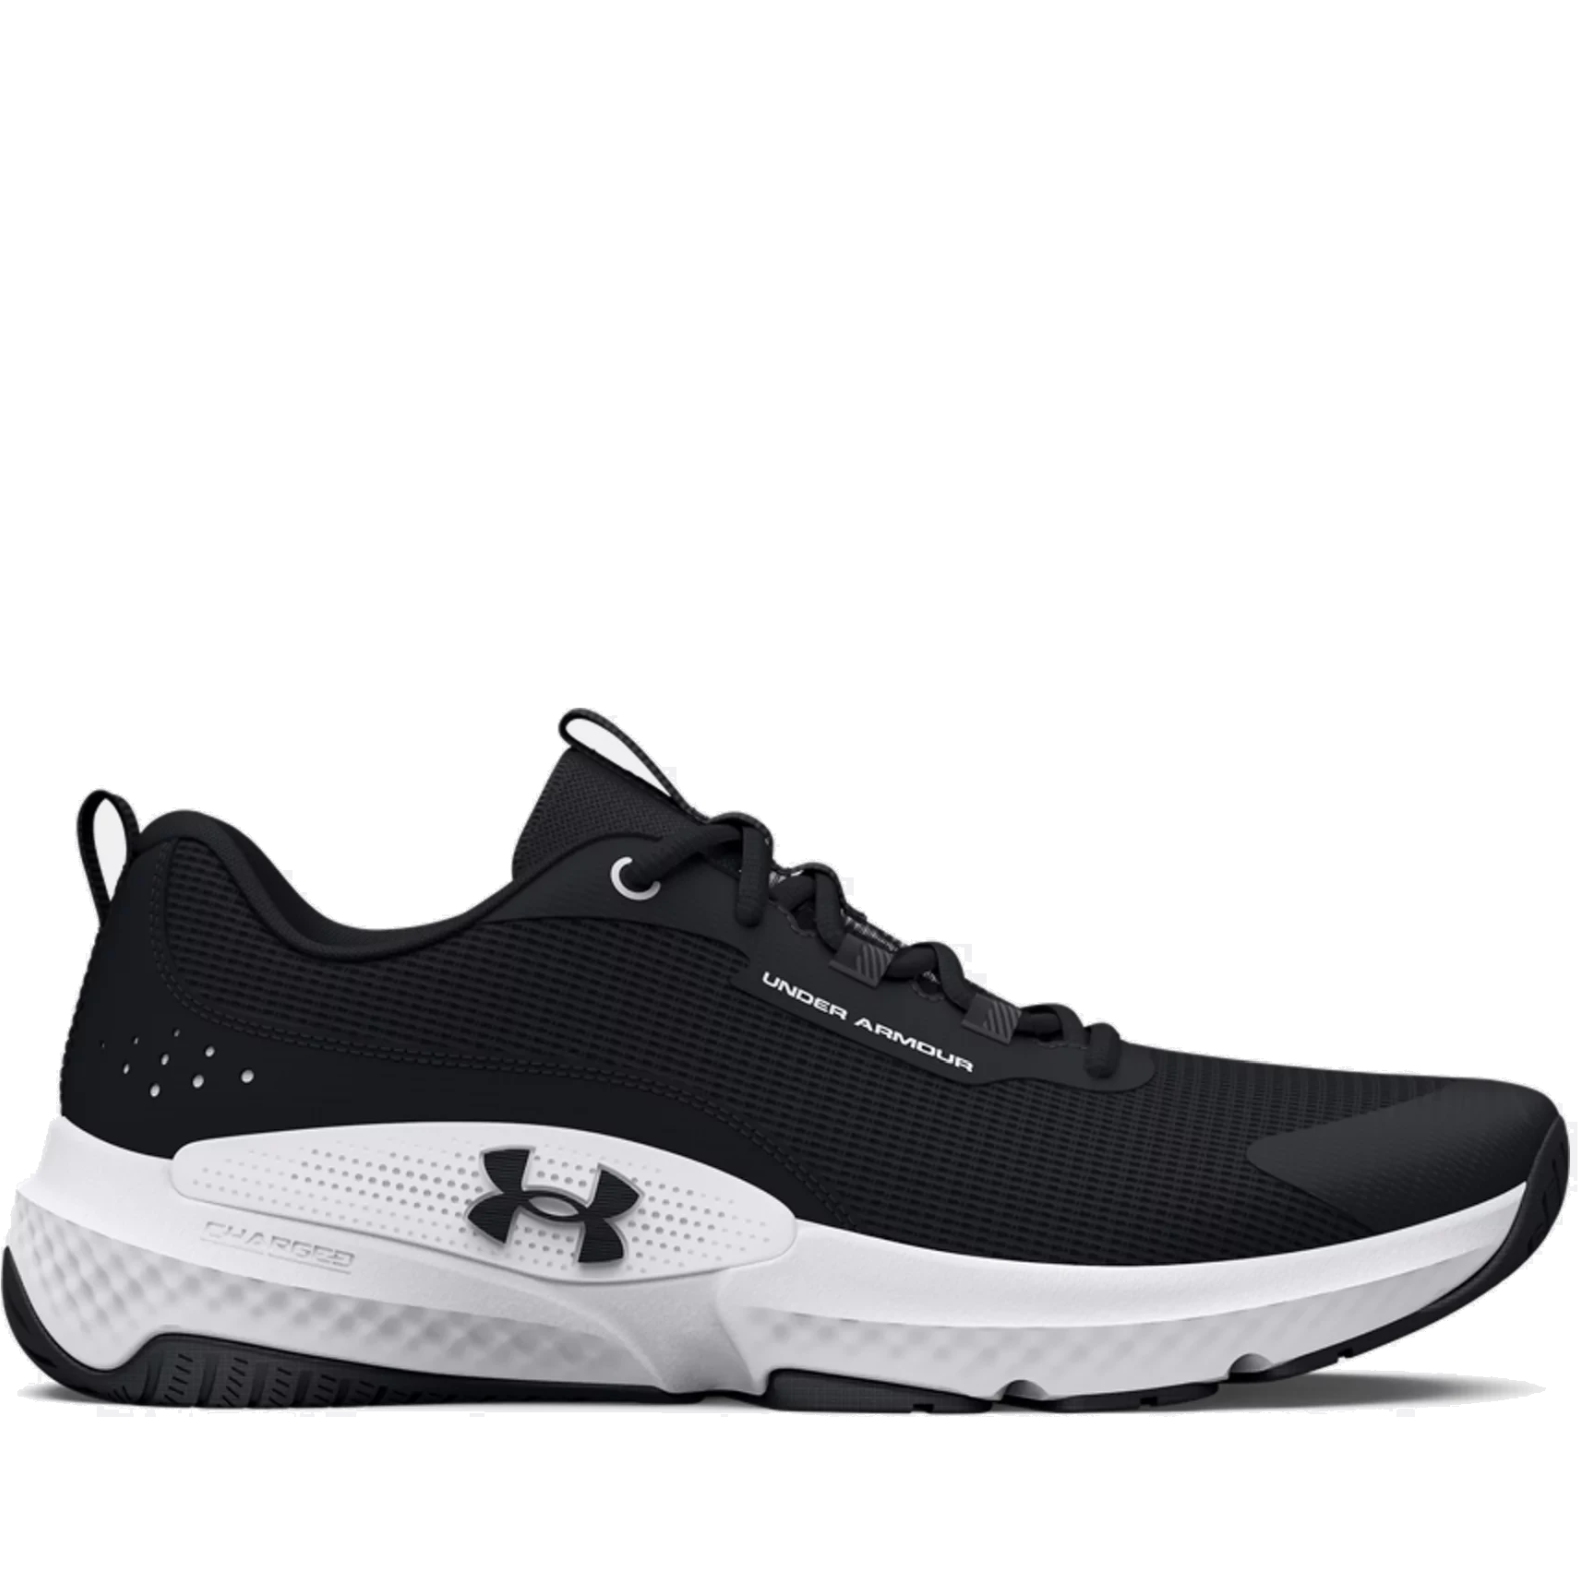 Buy Under Armour Men's UA Dynamic Select Training Shoes Black in